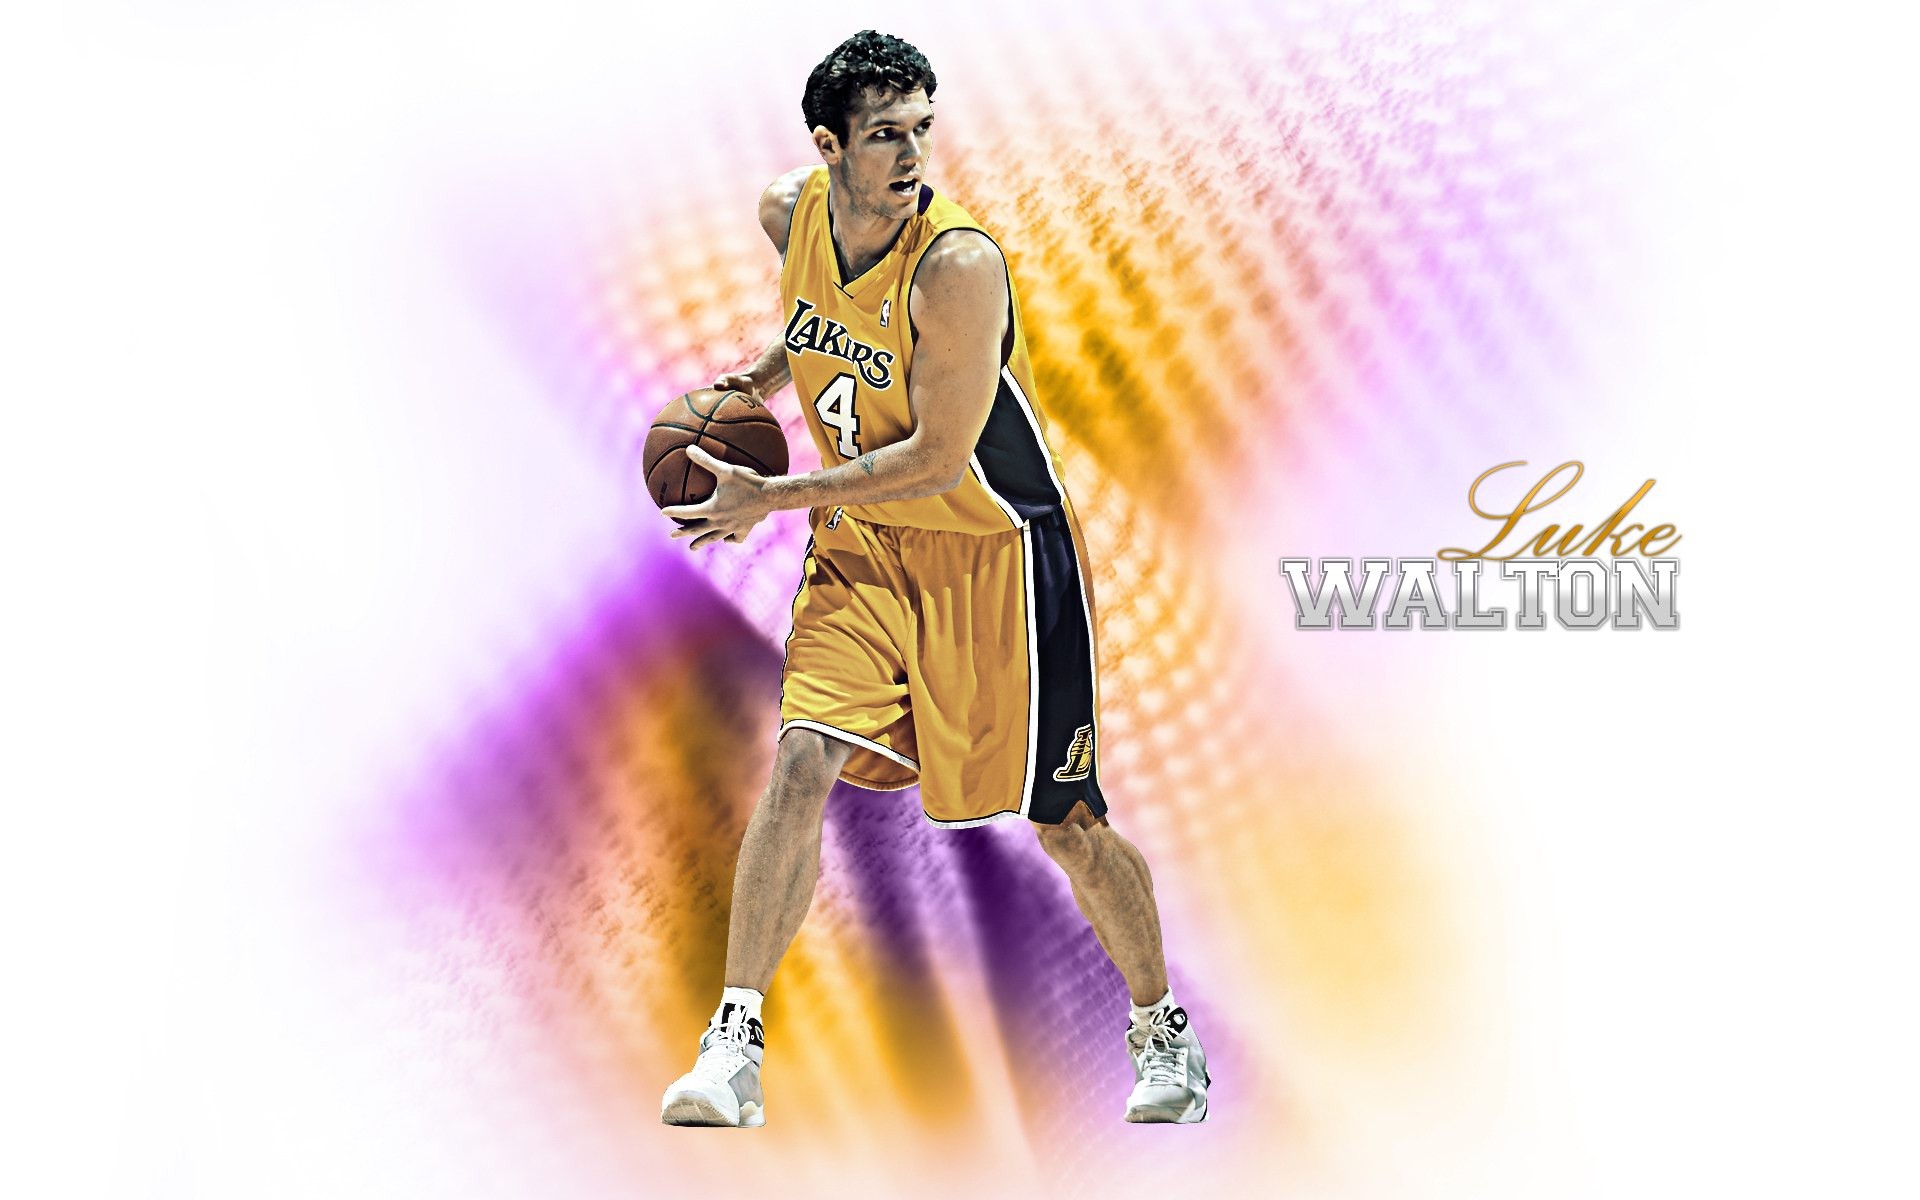 Los Angeles Lakers Wallpaper Oficial #19 - 1920x1200